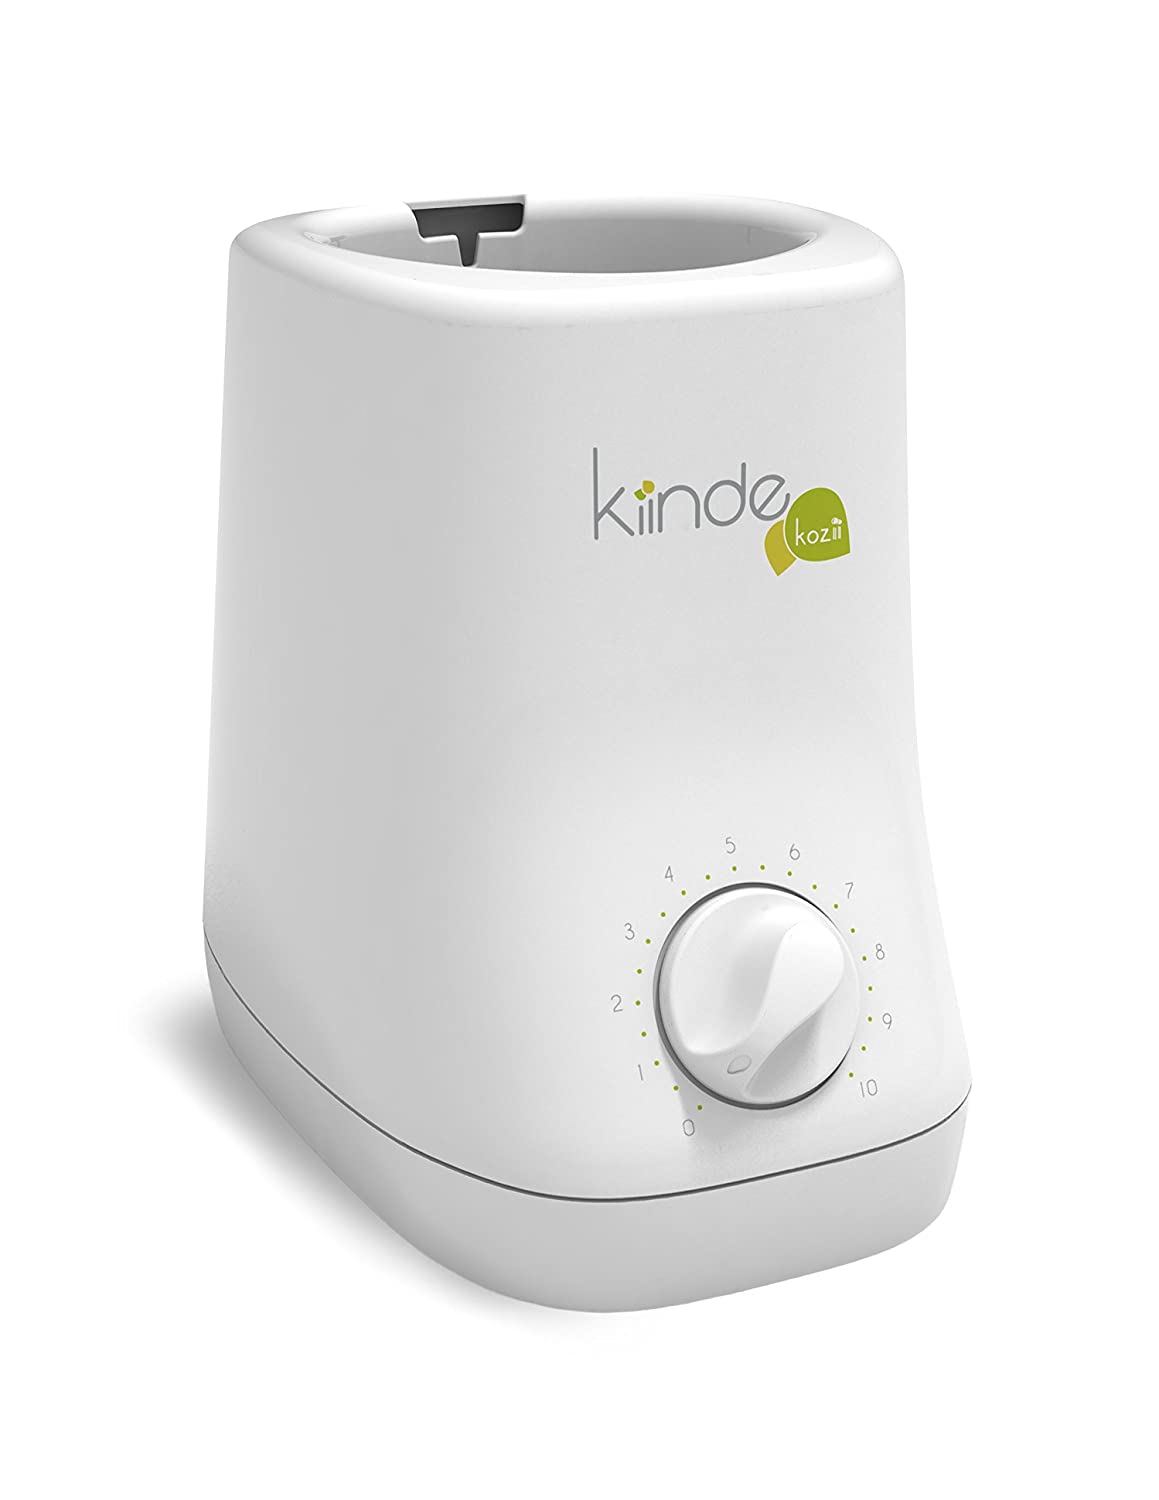 Kiinde Kozii Baby Bottle Warmer and Breast Milk Warmer for Warming Breast Milk, Infant Formula and Baby Food 